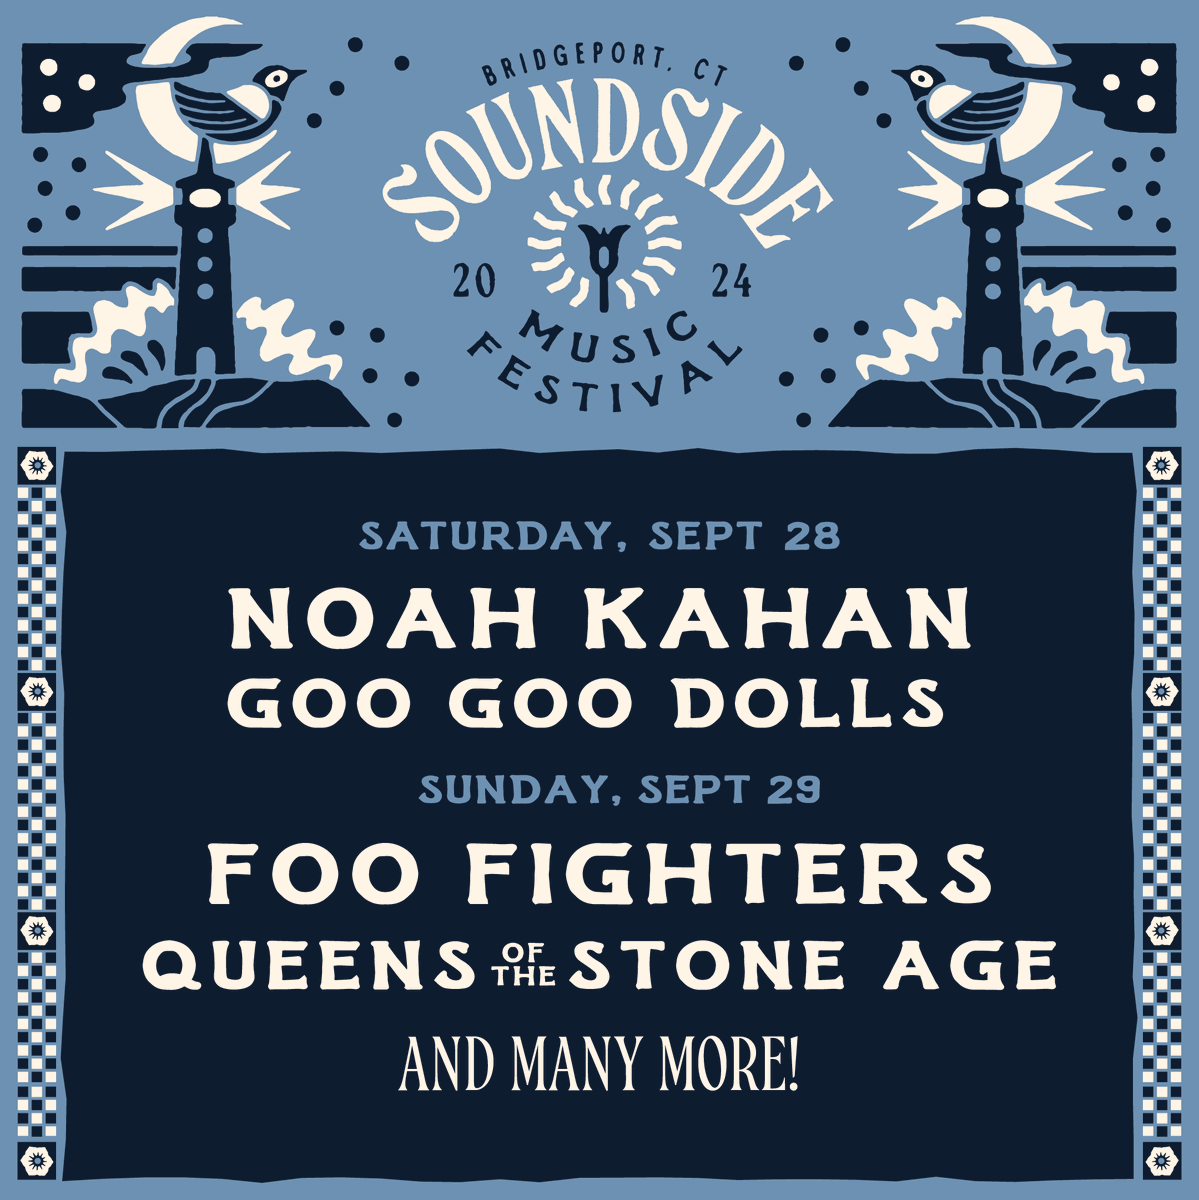 Cardmembers can purchase #CitiPresale tickets NOW to Connecticut’s biggest music festival, @soundsidefest, featuring Foo Fighters, Noah Kahan, Queens of the Stone Age, Goo Goo Dolls & many more!  Learn more & purchase tix here: on.citi/4bBBoWw